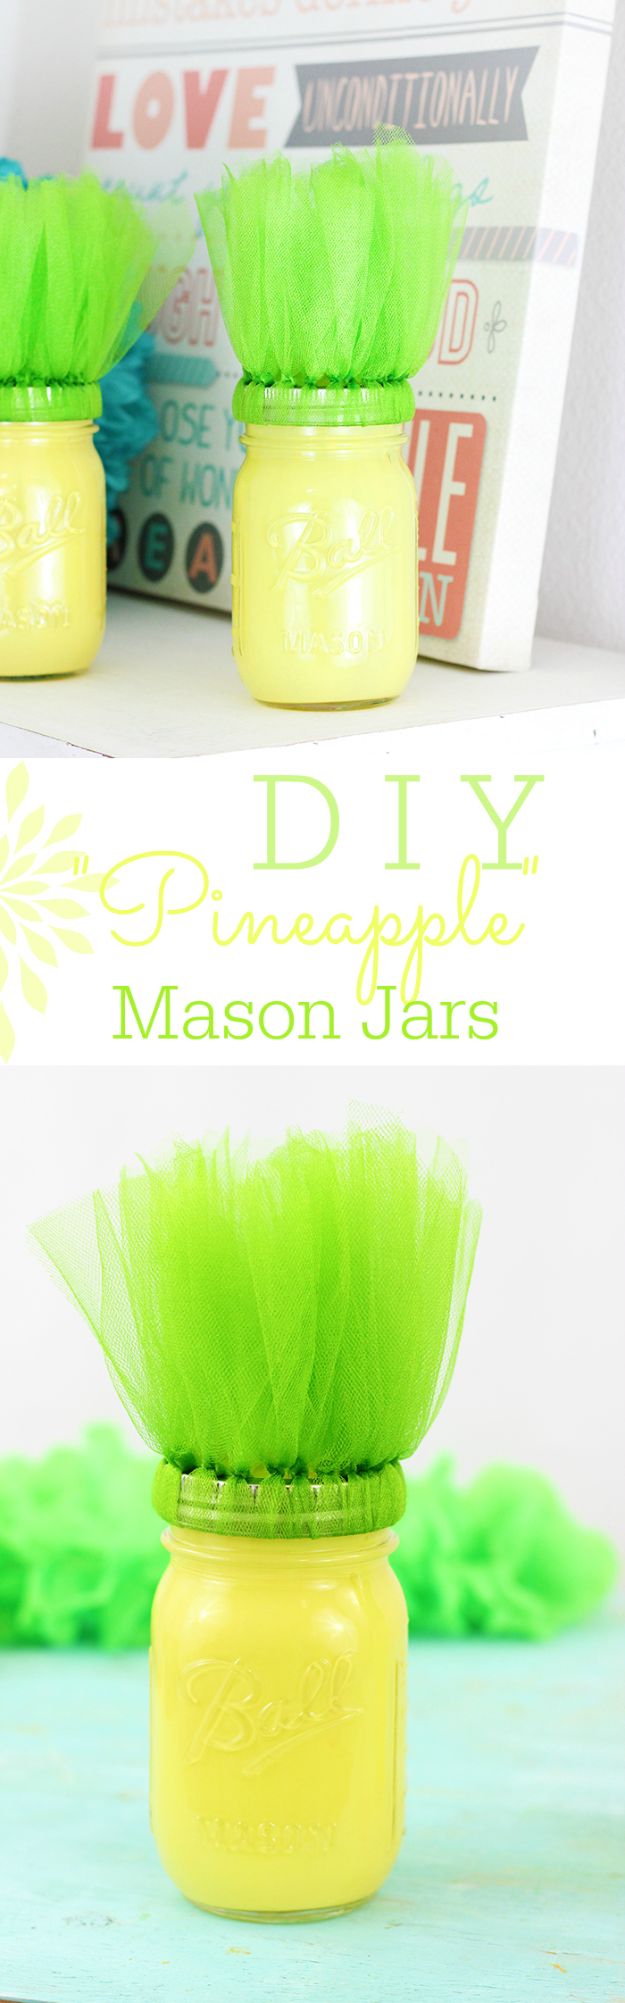 Pineapple Crafts - DIY Pineapple Mason Jars - Cute Craft Projects That Make Cool DIY Gifts - Wall Decor, Bedroom Art, Jewelry Idea